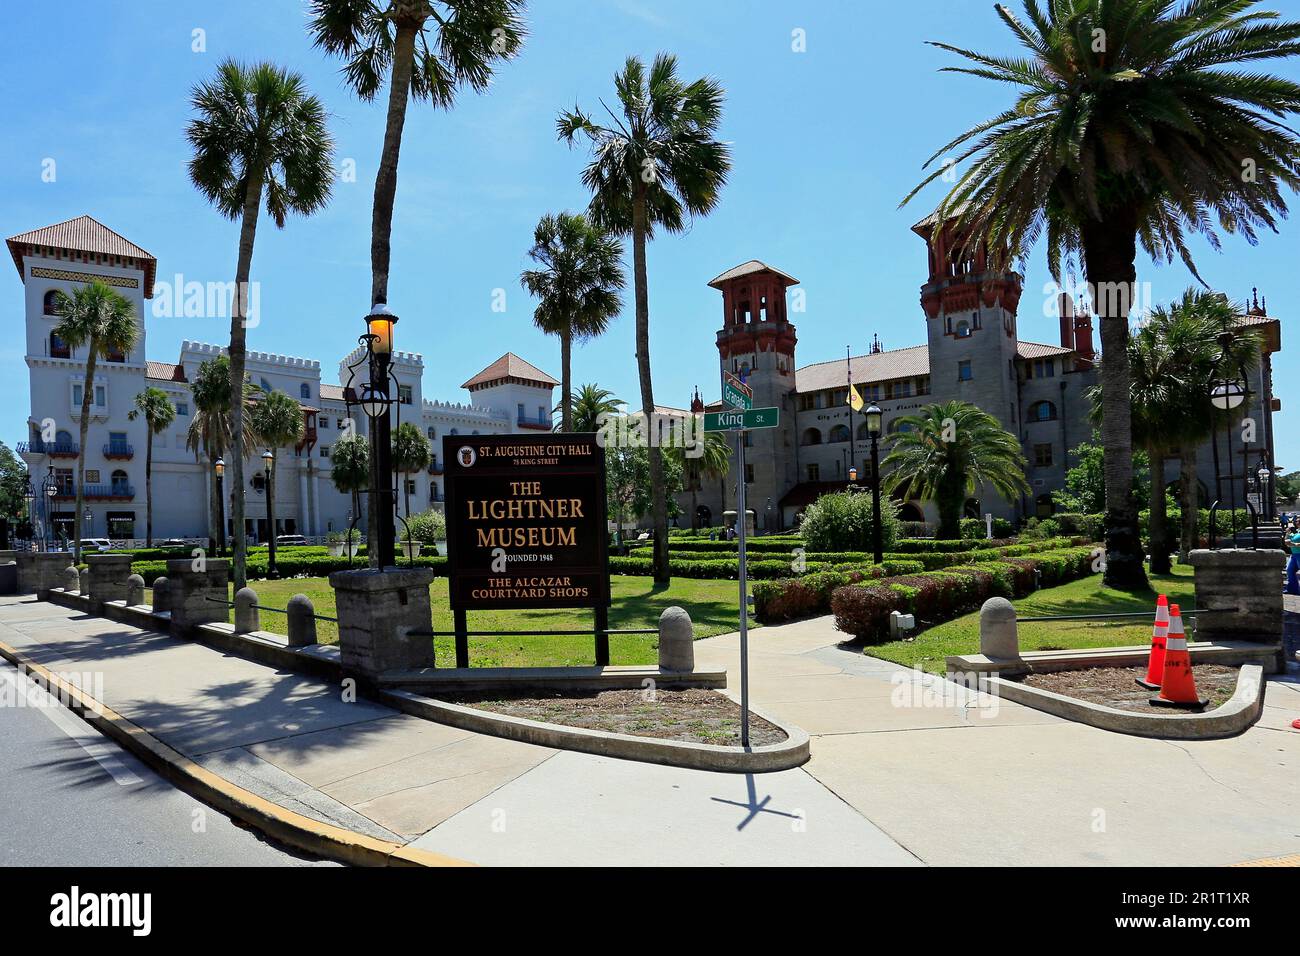 Lightner Museum, St. Augustine, Florida, USA, st augustine, saint augustine, street, old town, town, street, streets, tourists, attractions Stock Photo